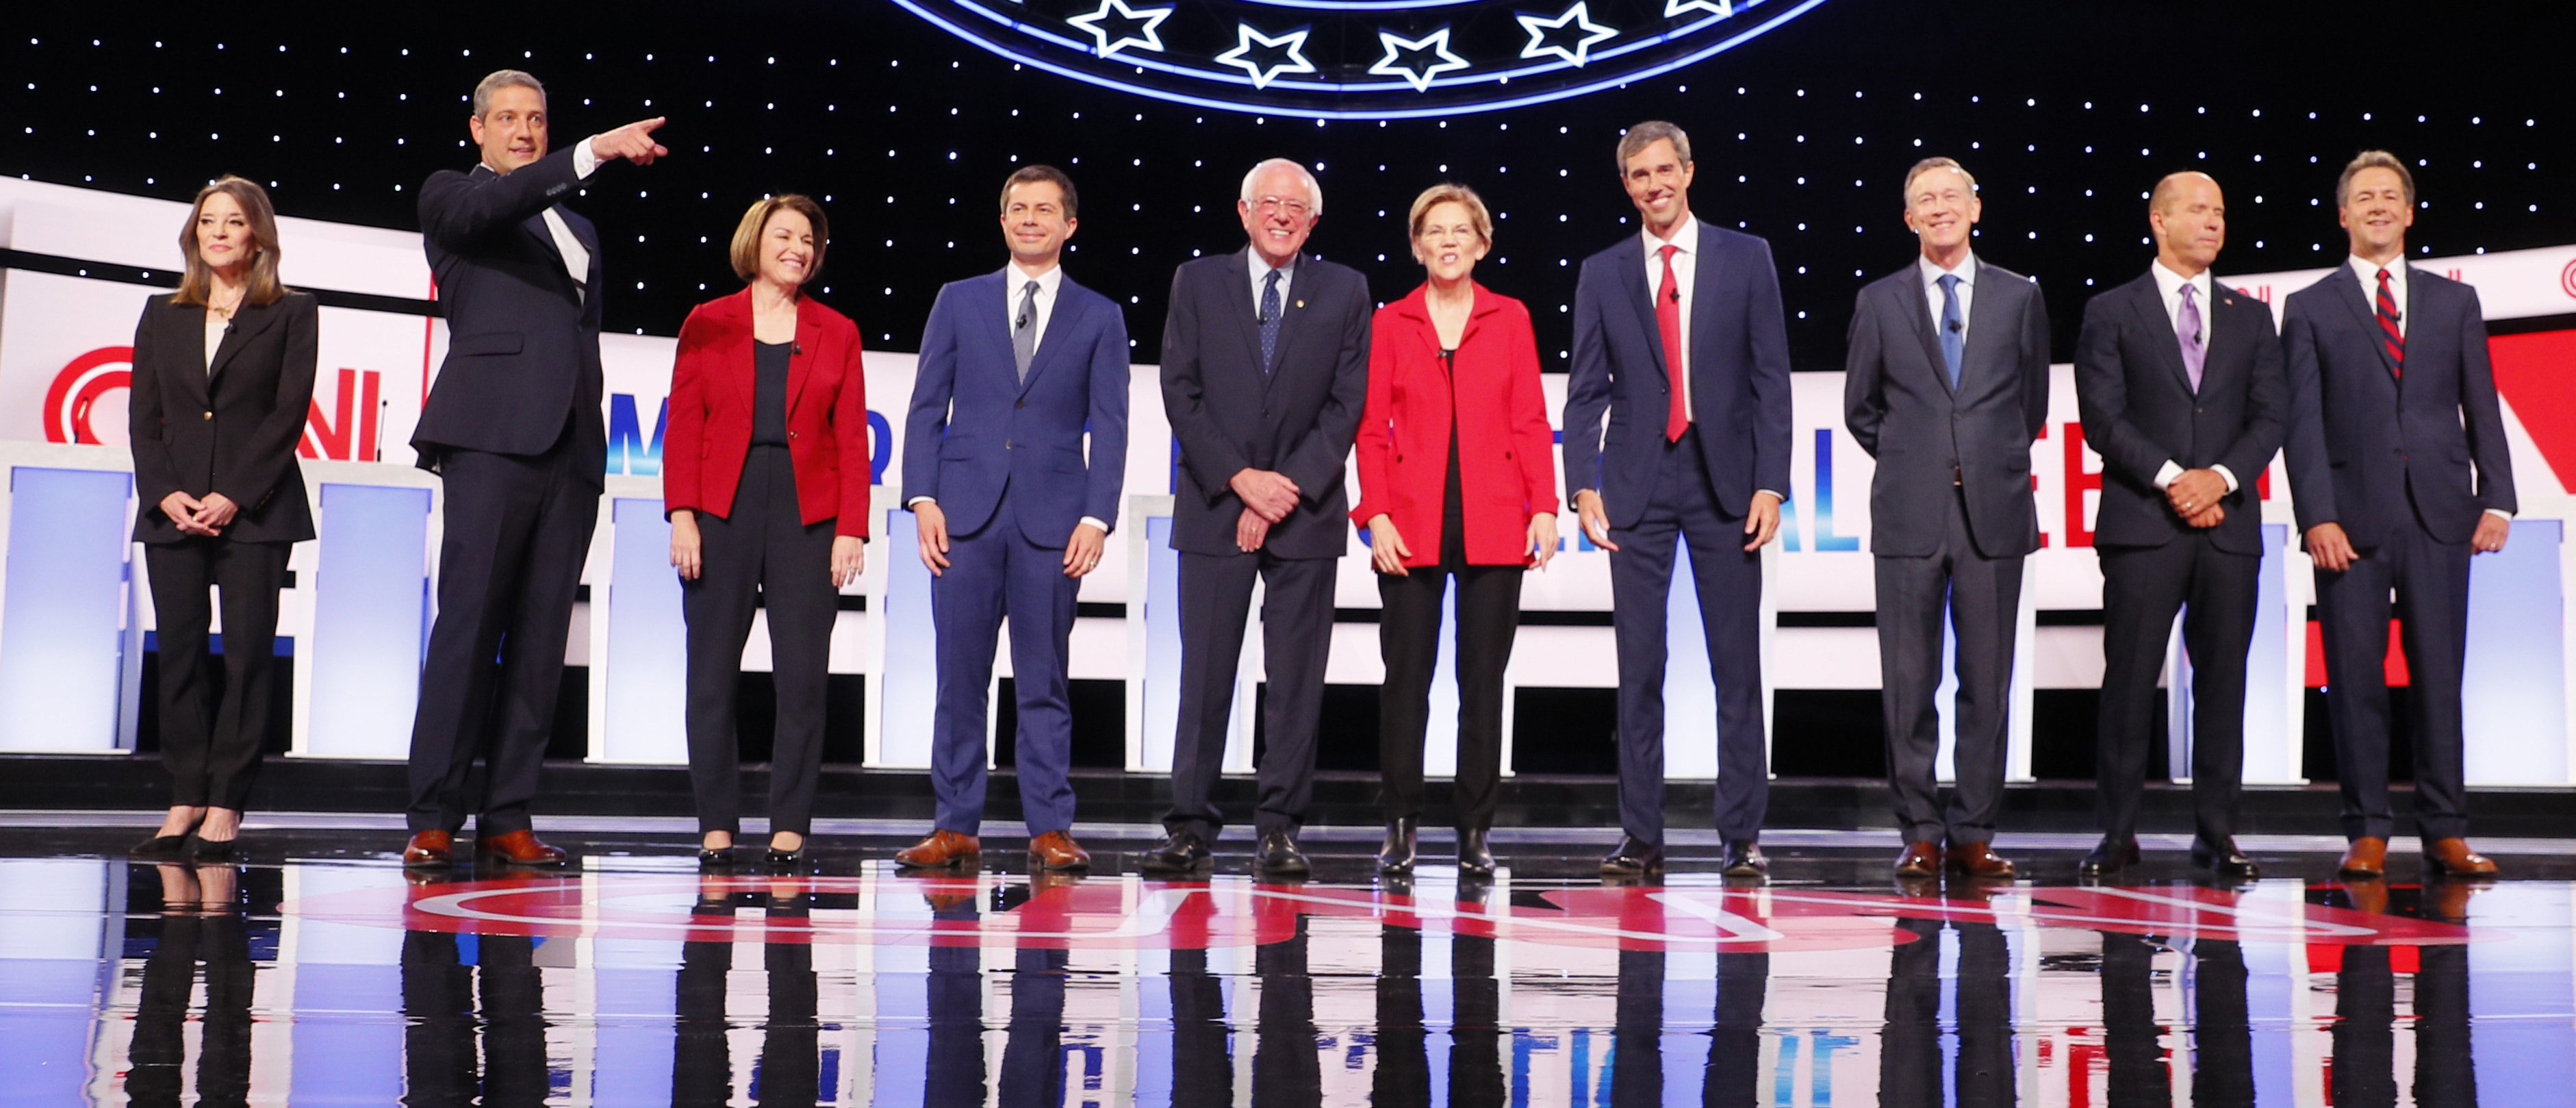 Here Are The Highlights From The Democratic Debates: Round 2, Night 1 | The Daily Caller3763 x 1618